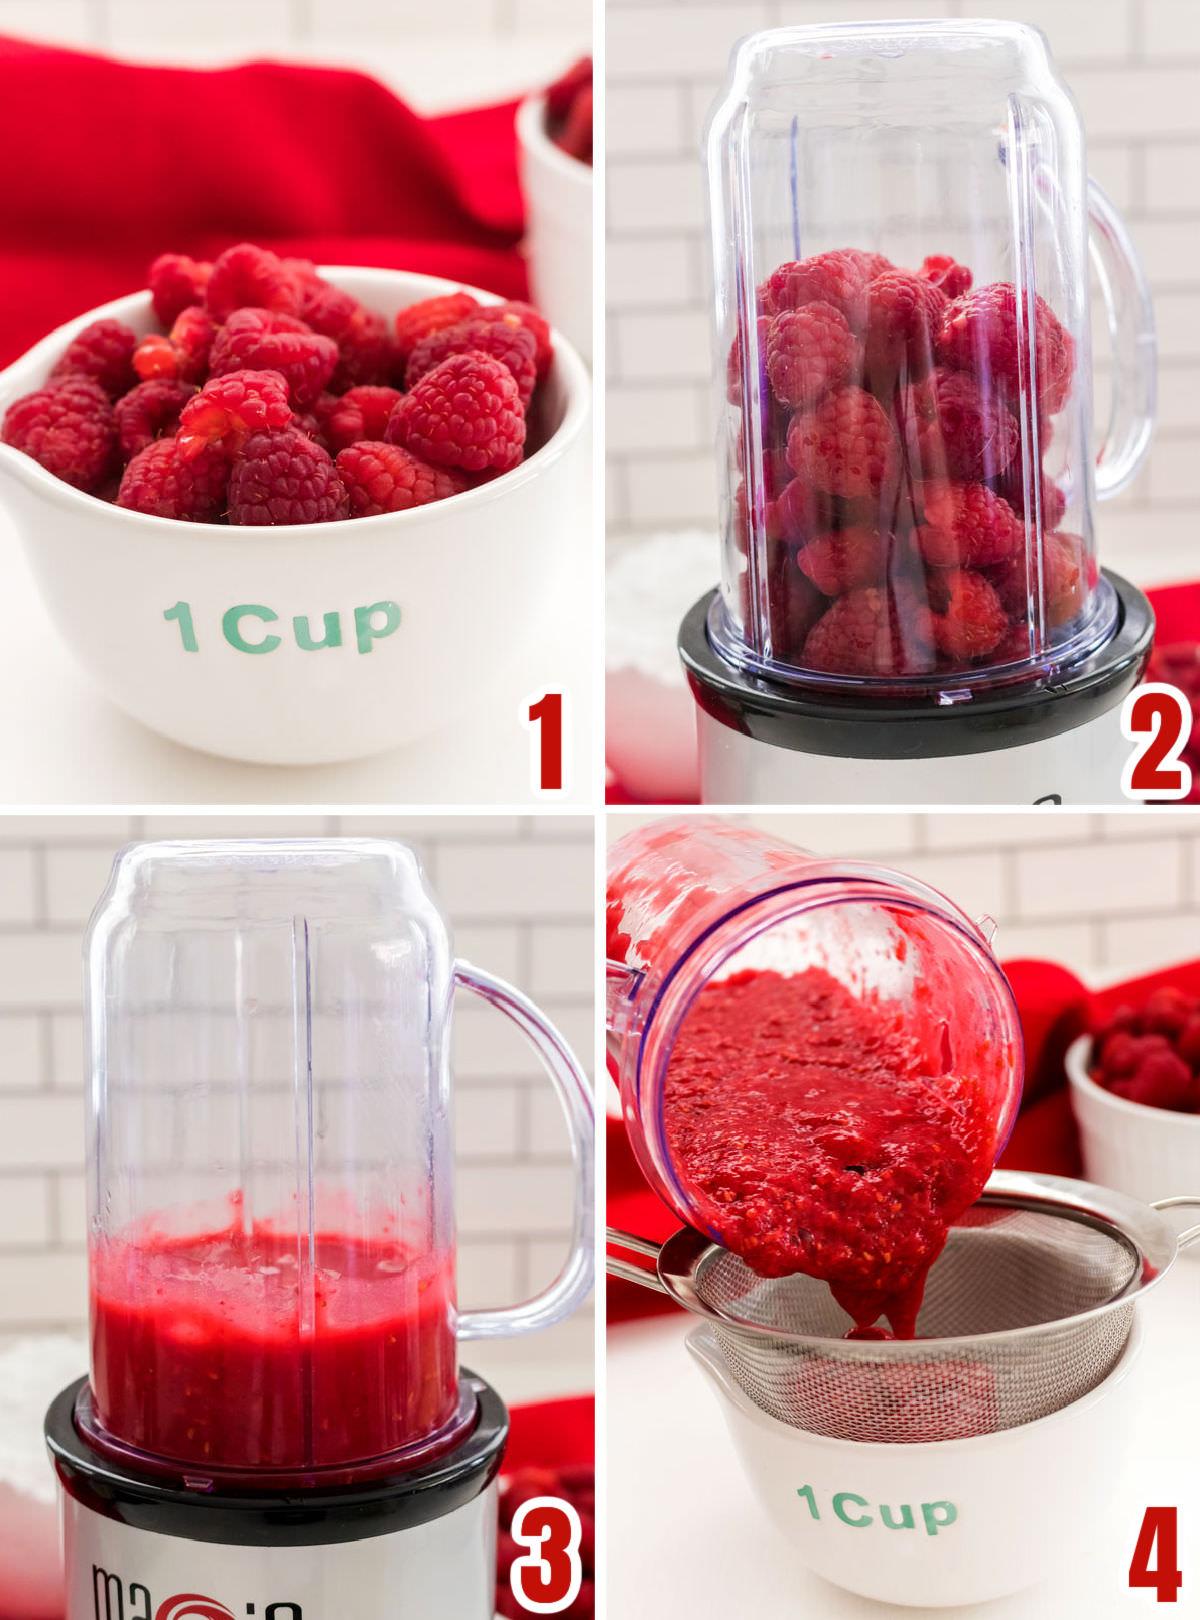 Collage image showing how to make the Raspberry Puree for the frosting.